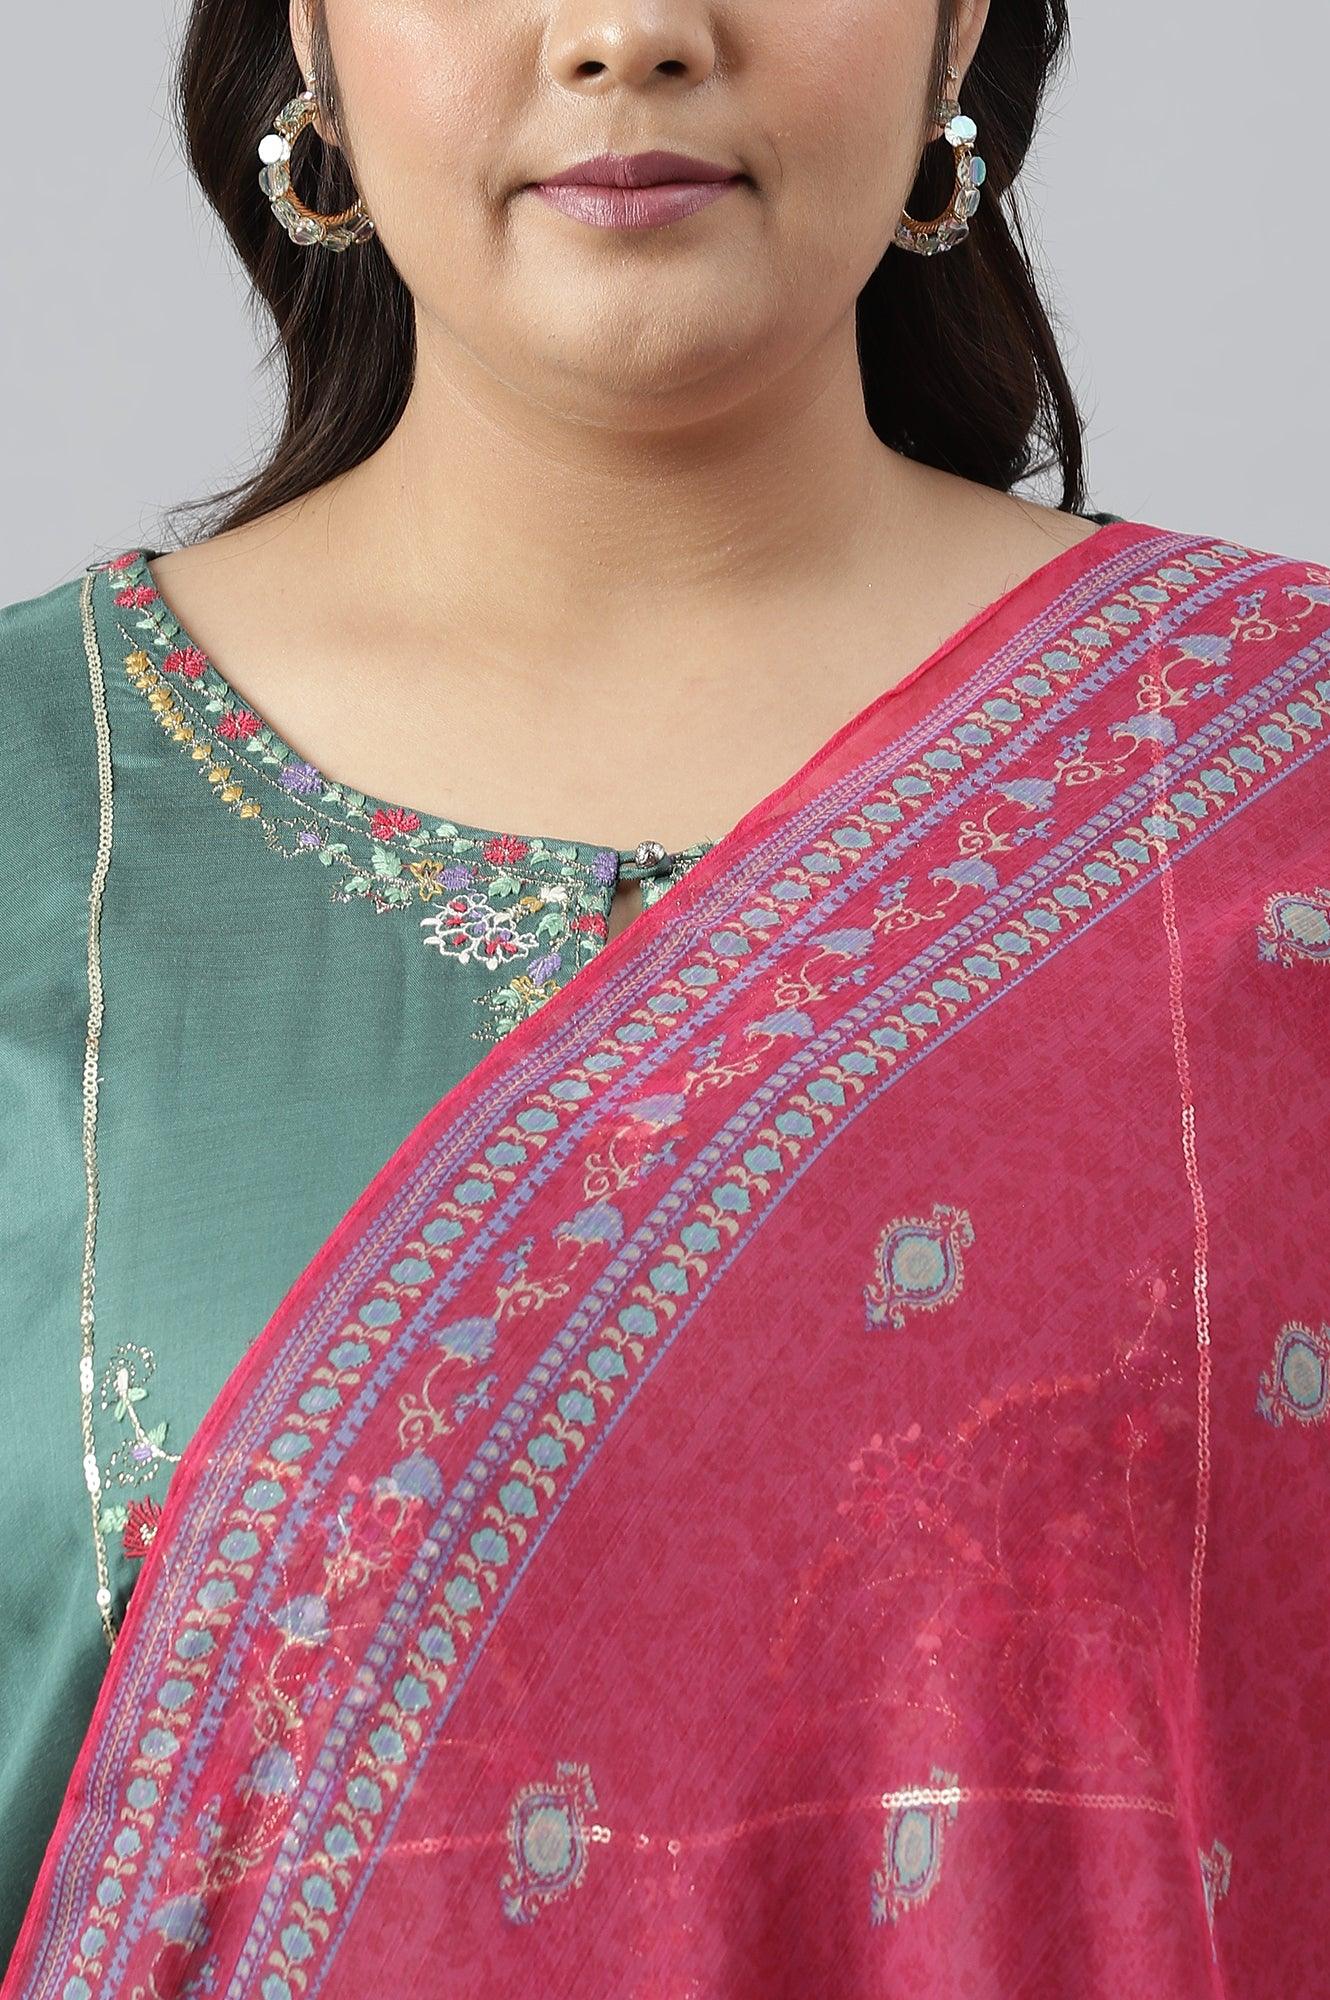 Plus Size Dark Green Embroidered kurta With Parallel Pants And Pink Printed Dupatta - wforwoman